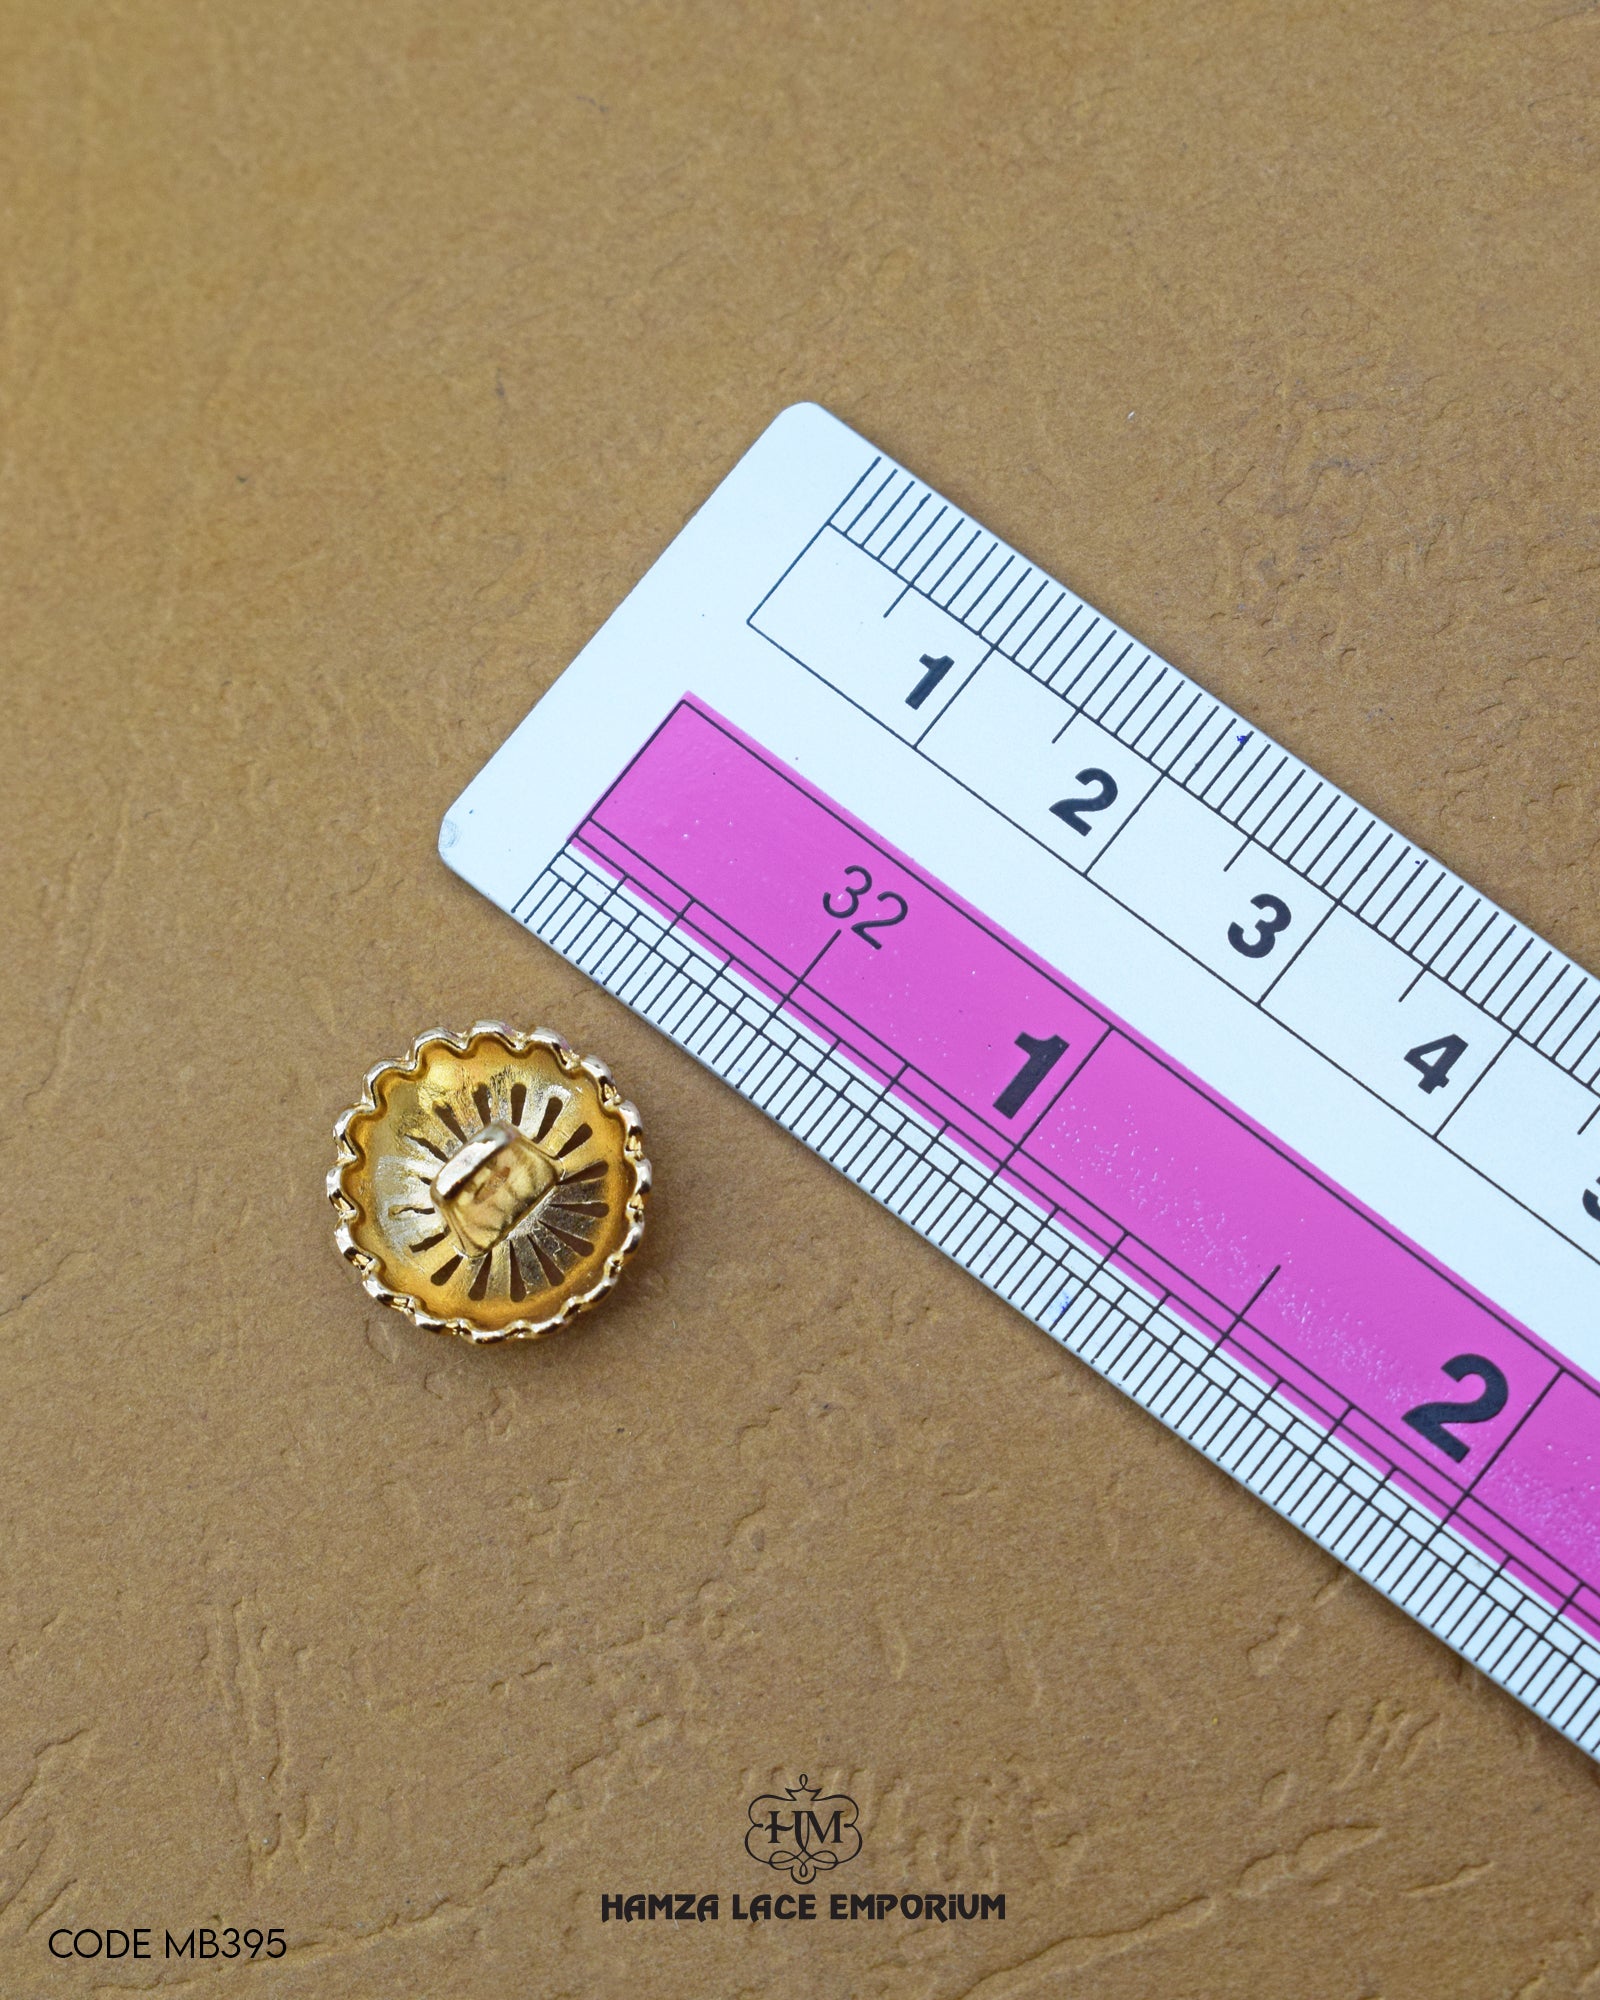 Size of the 'Flower Design Metal Button MB395' is given with the help of a ruler